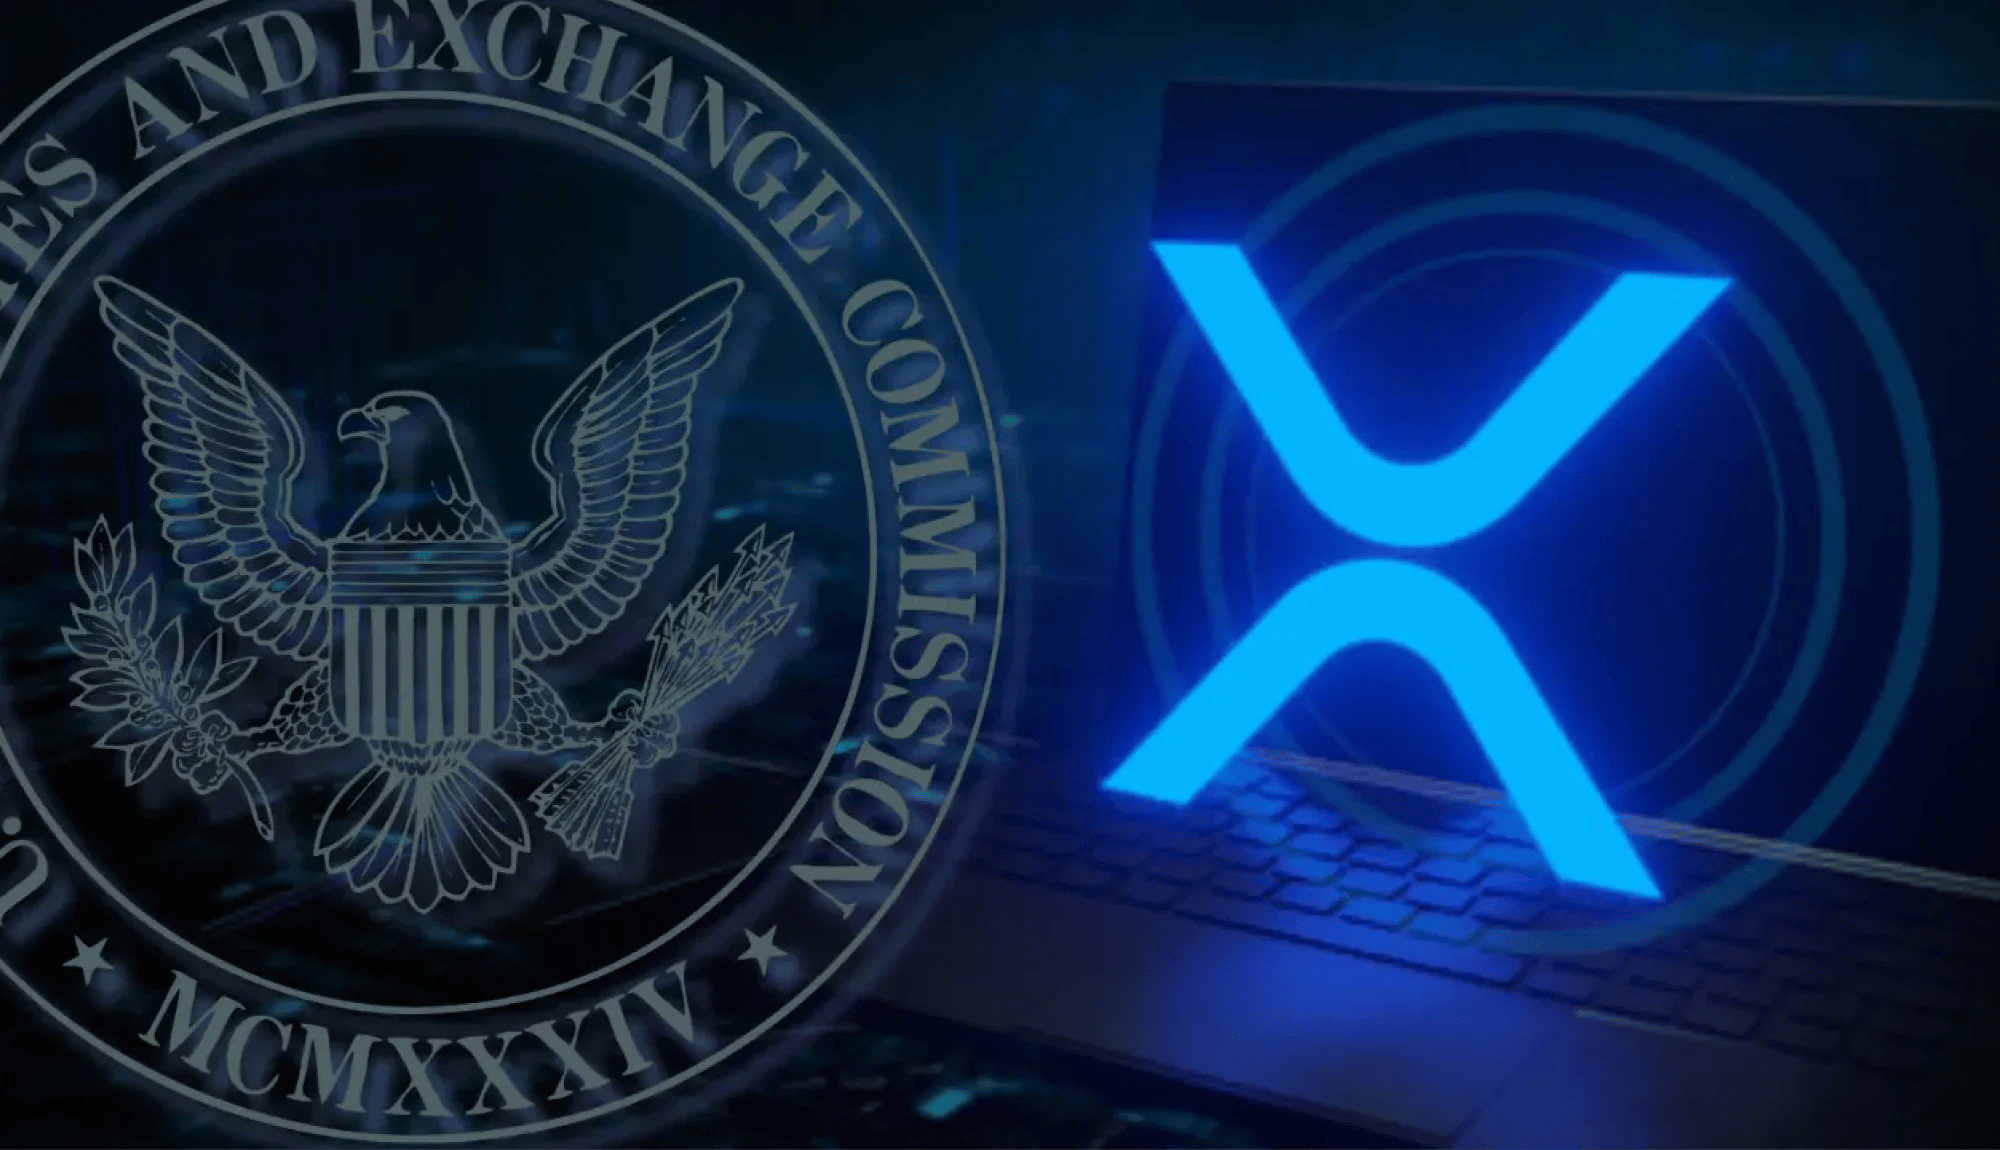 SEC Loses Badly, Pro-XRP Lawyers Celebrate Victory